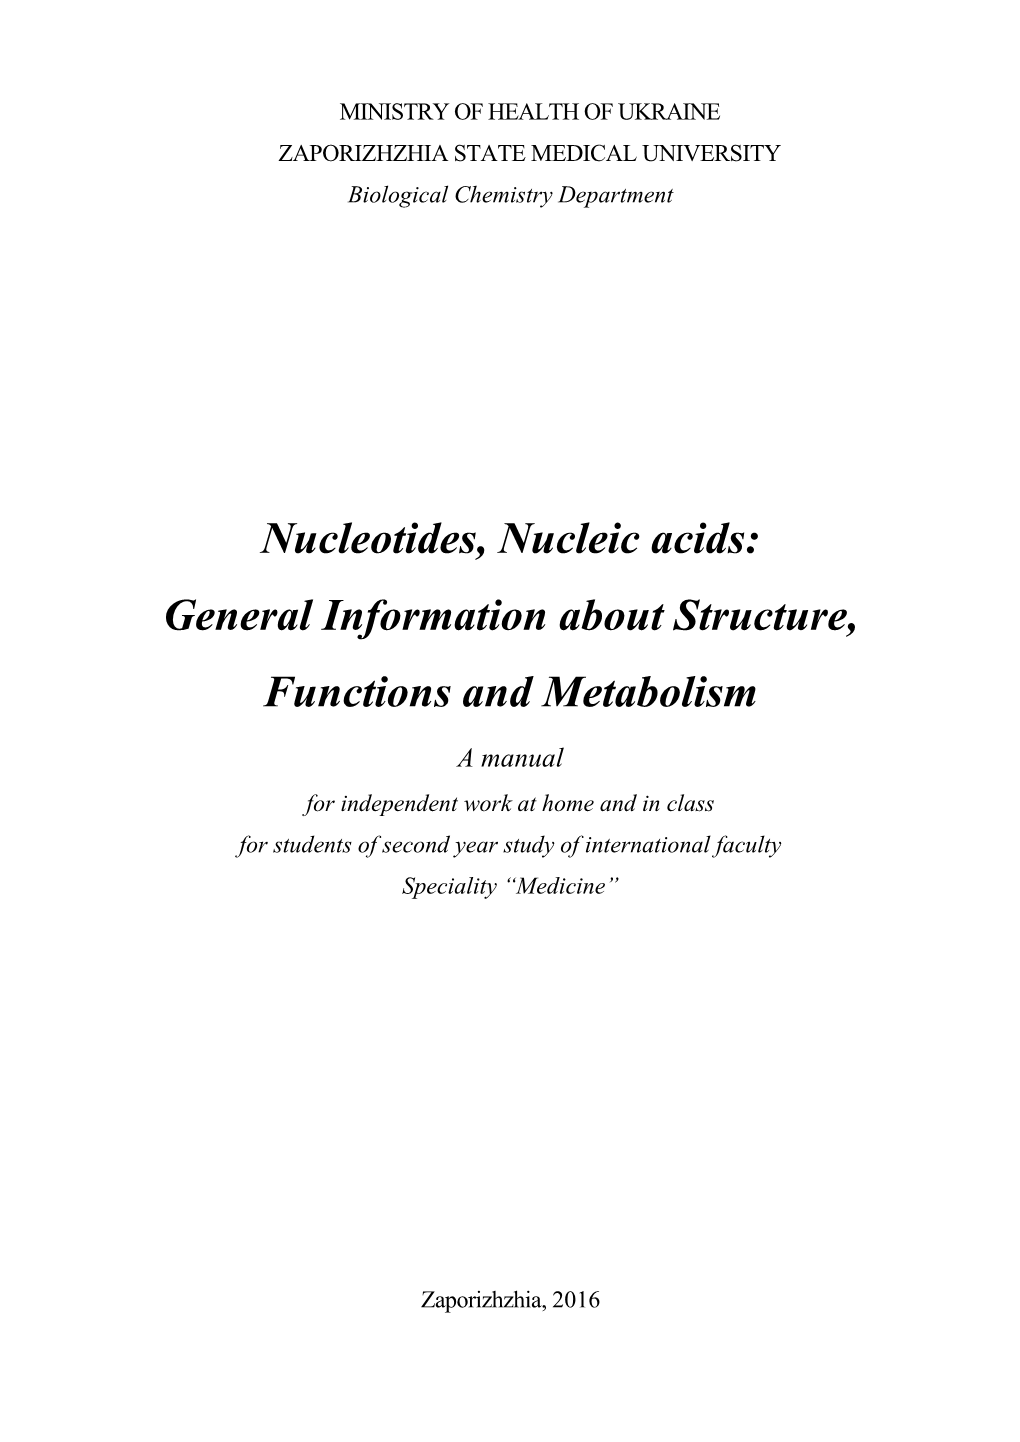 Nucleotides, Nucleic Acids: General Information About Structure, Functions and Metabolism